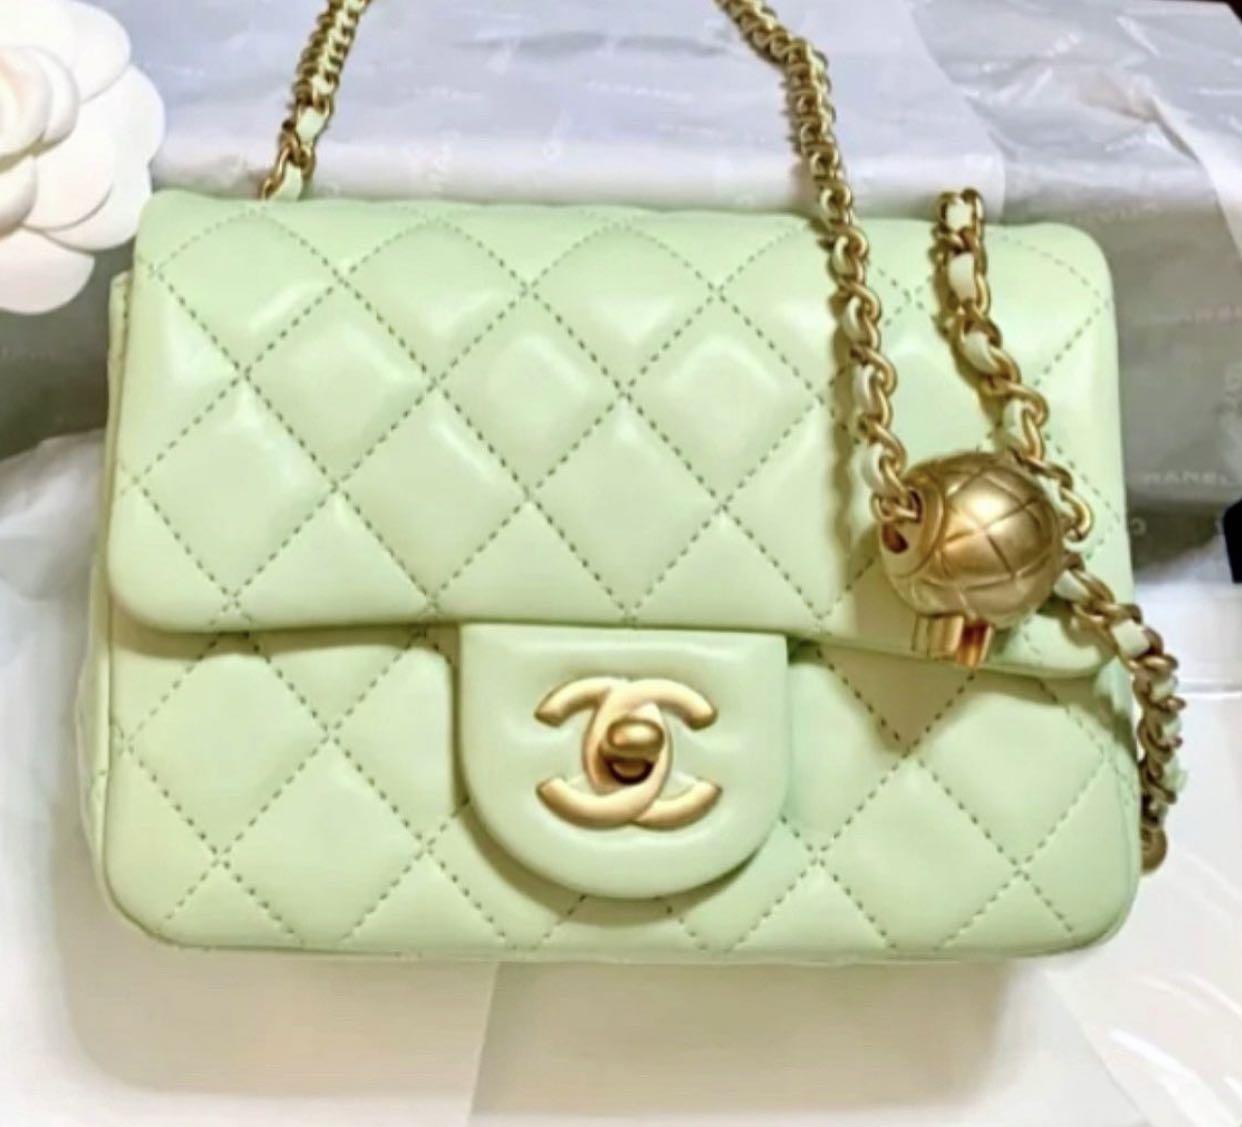 Chanel 23P Bag Tryons!, Gallery posted by etherealpeonies